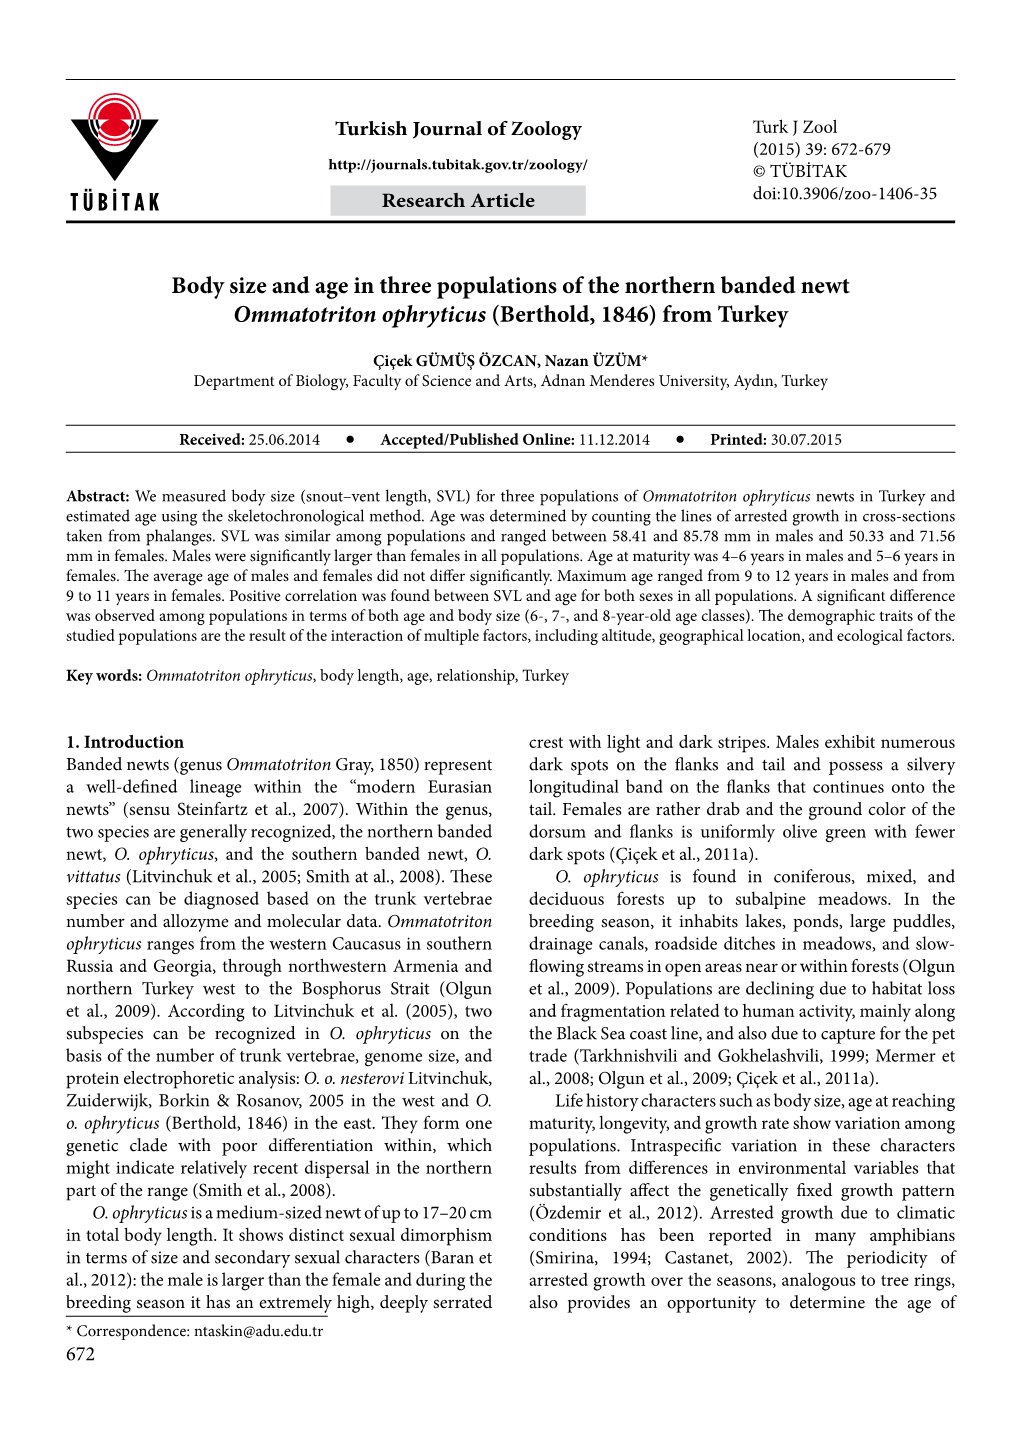 Body Size and Age in Three Populations of the Northern Banded Newt Ommatotriton Ophryticus (Berthold, 1846) from Turkey